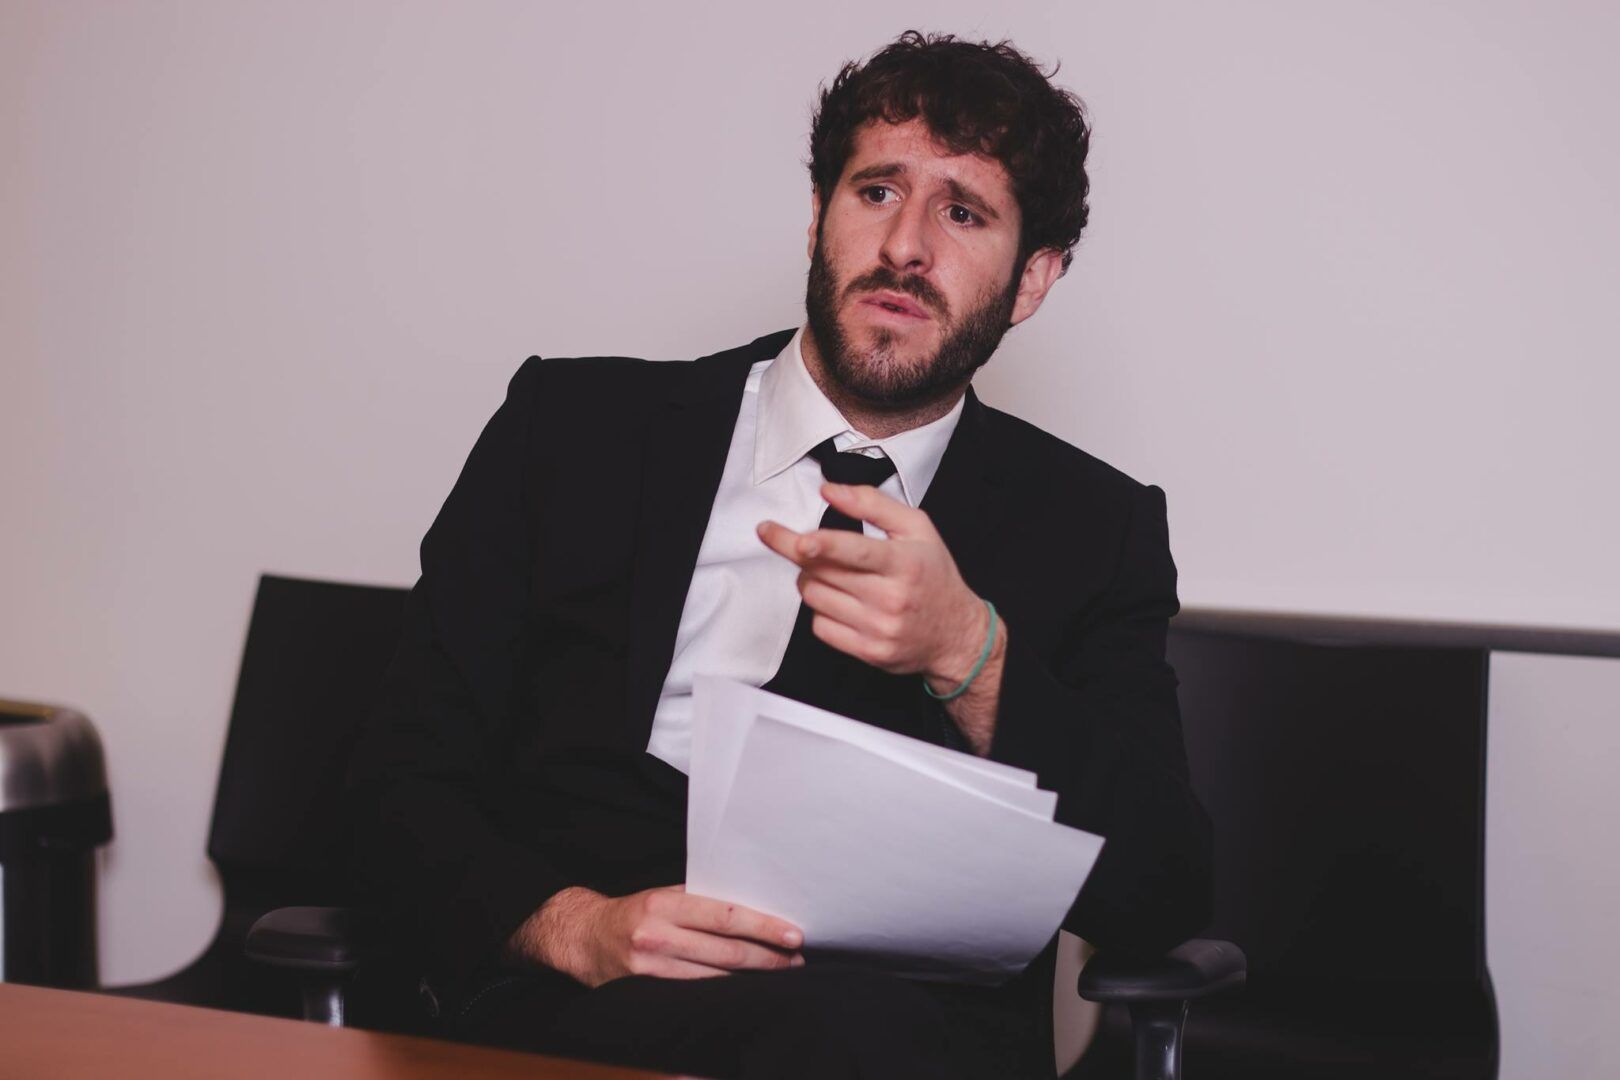 Lil Dicky Announces the “Professional Rapper Tour”